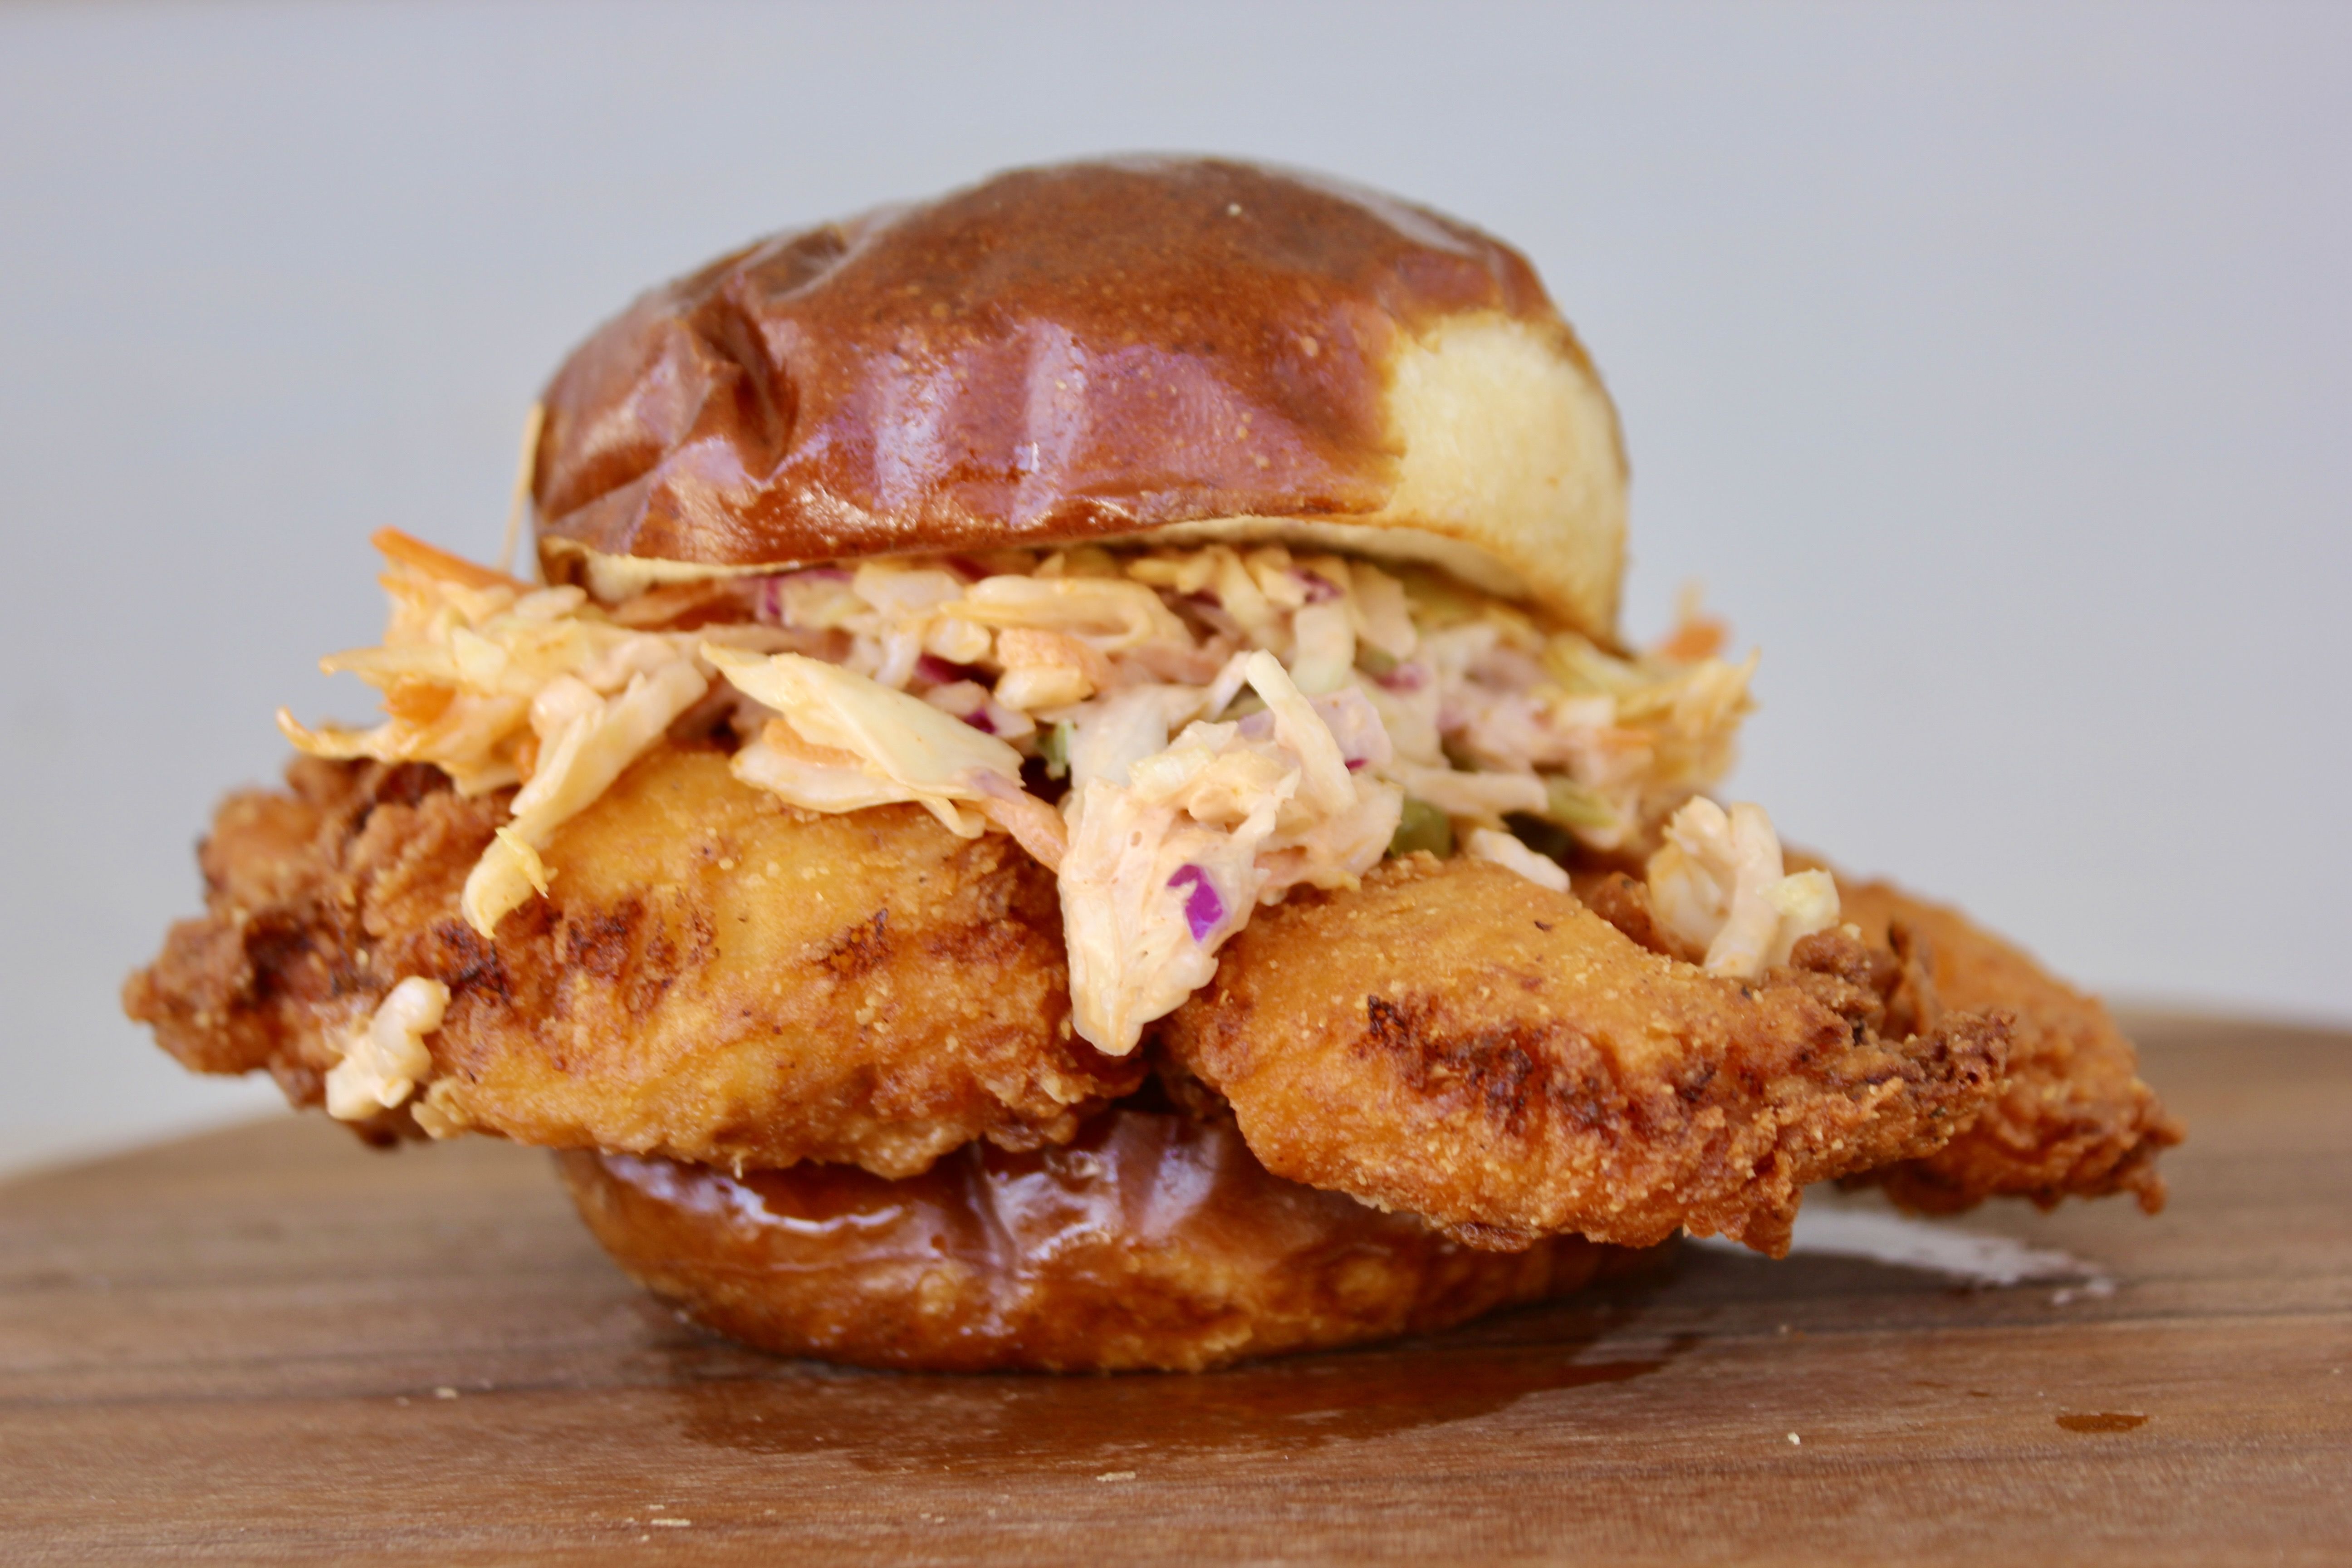 The Nashville fried chicken sandwich from Exile.